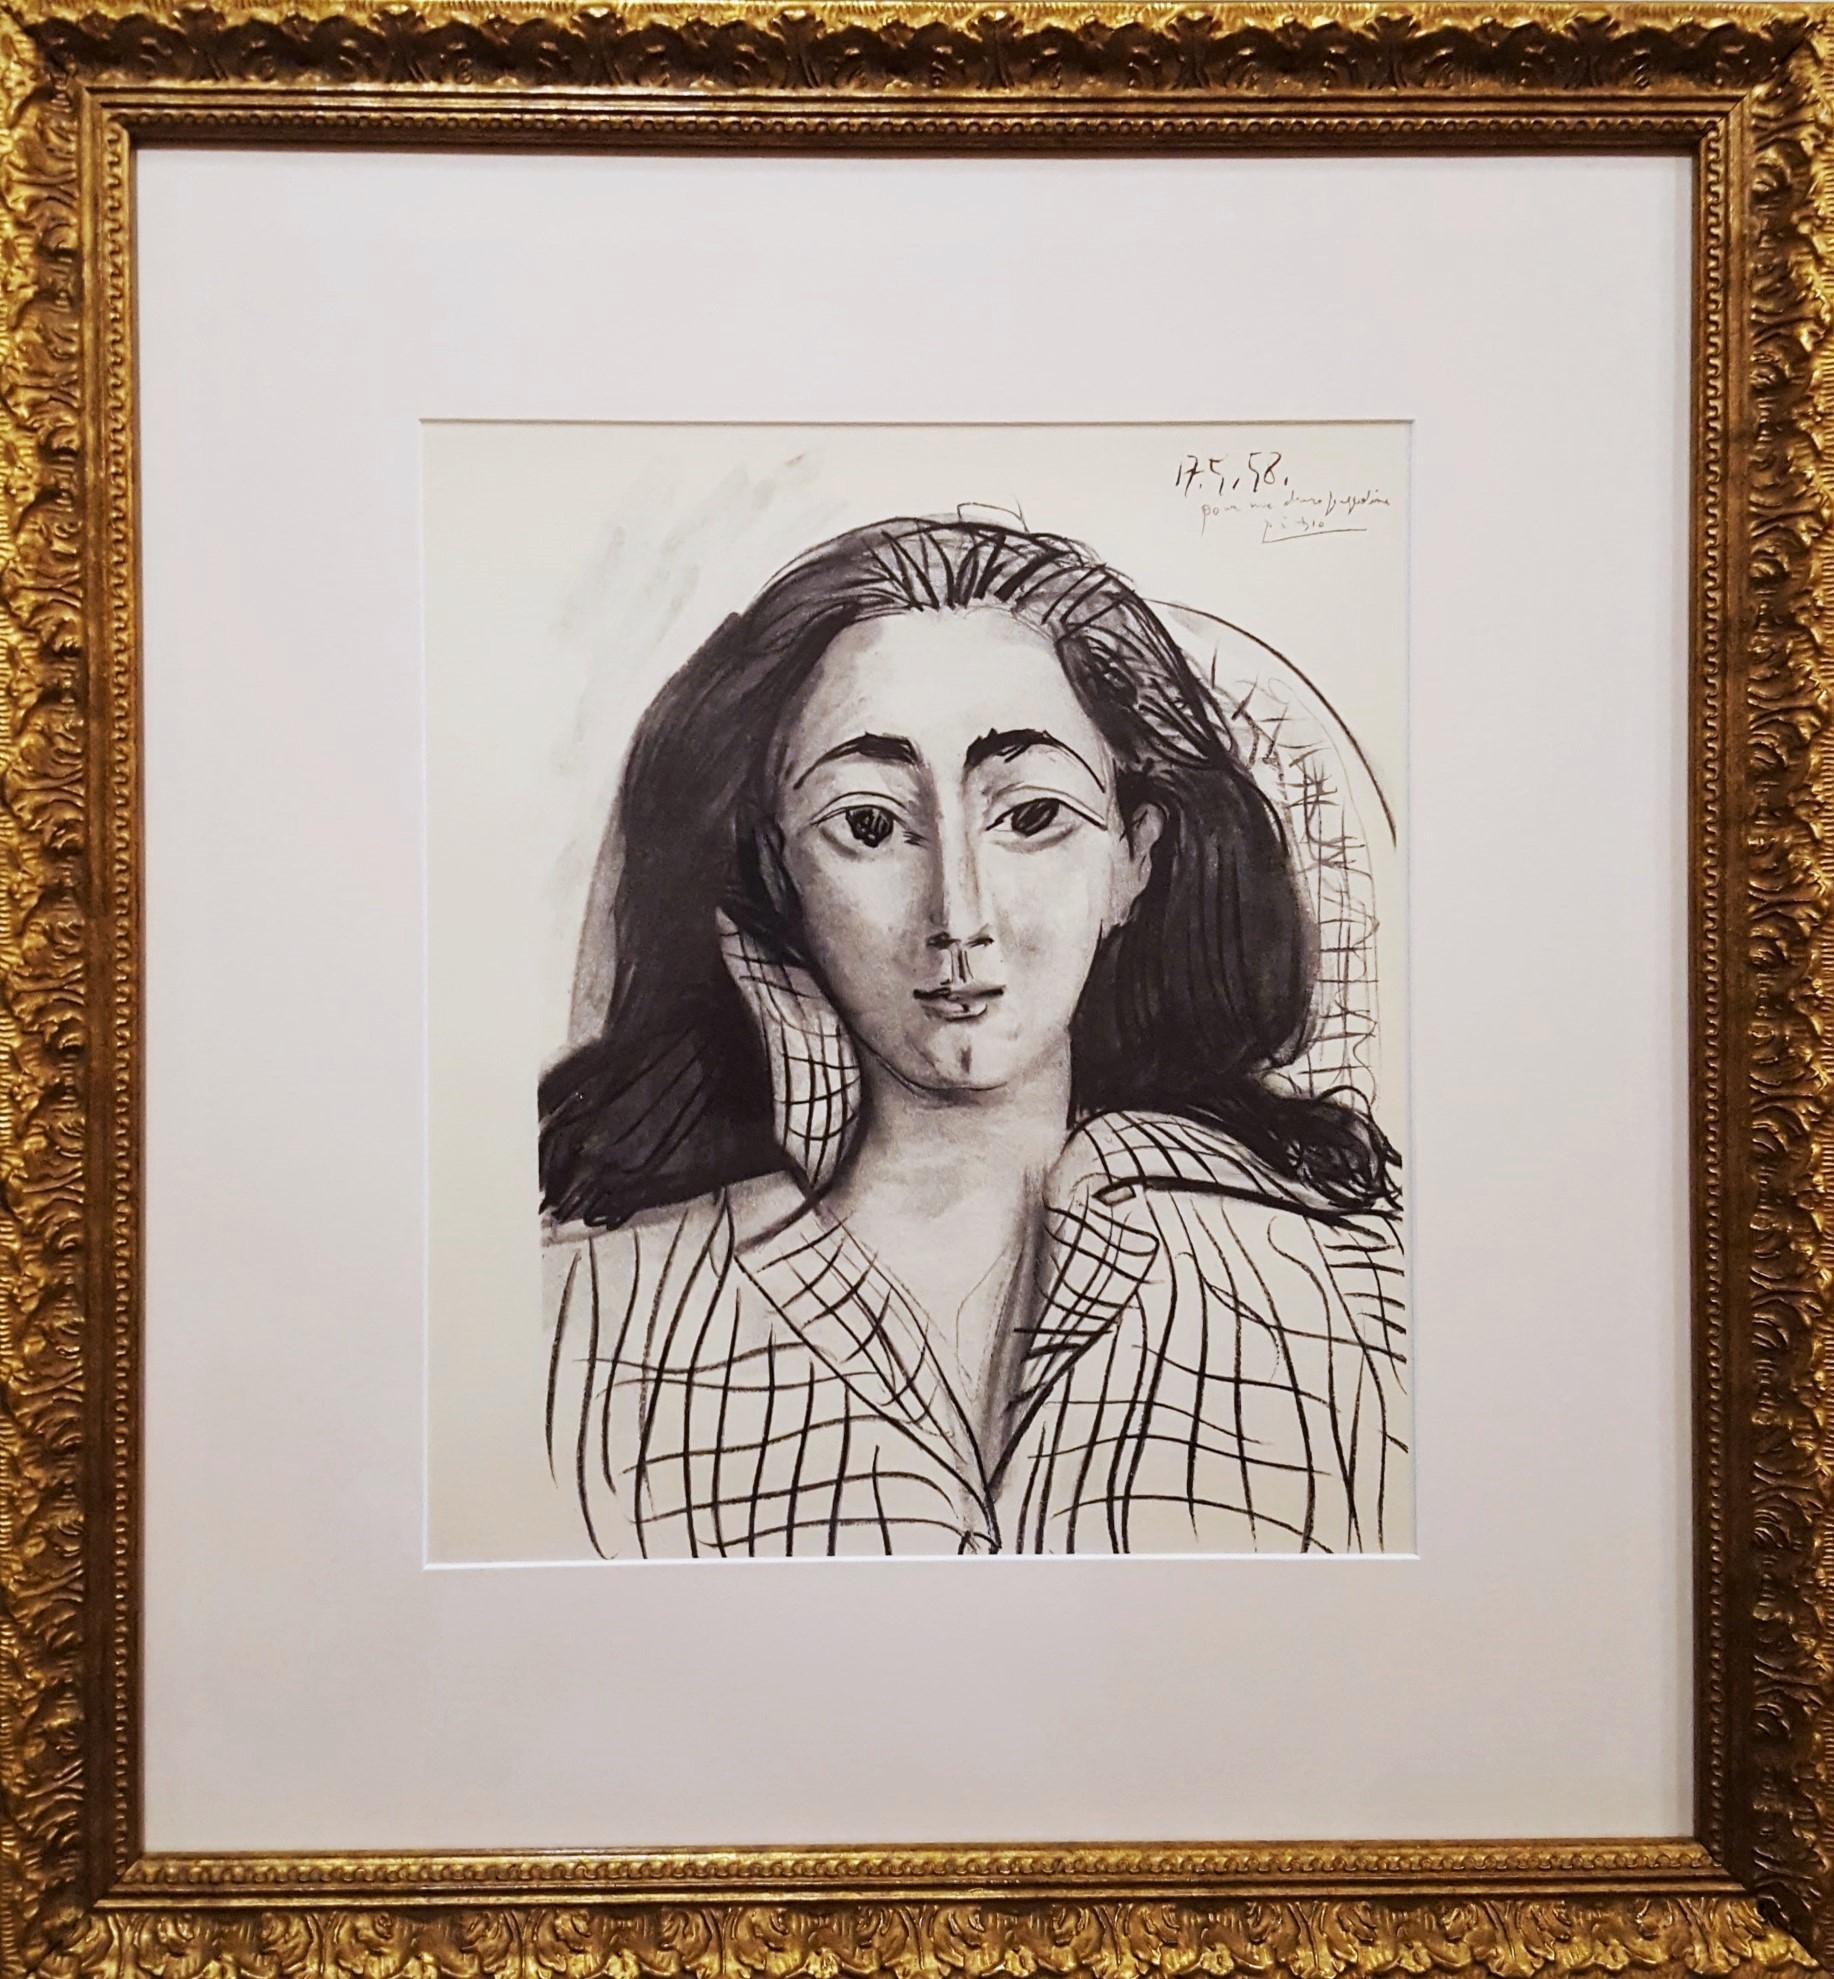 Jacqueline - Print by (after) Pablo Picasso